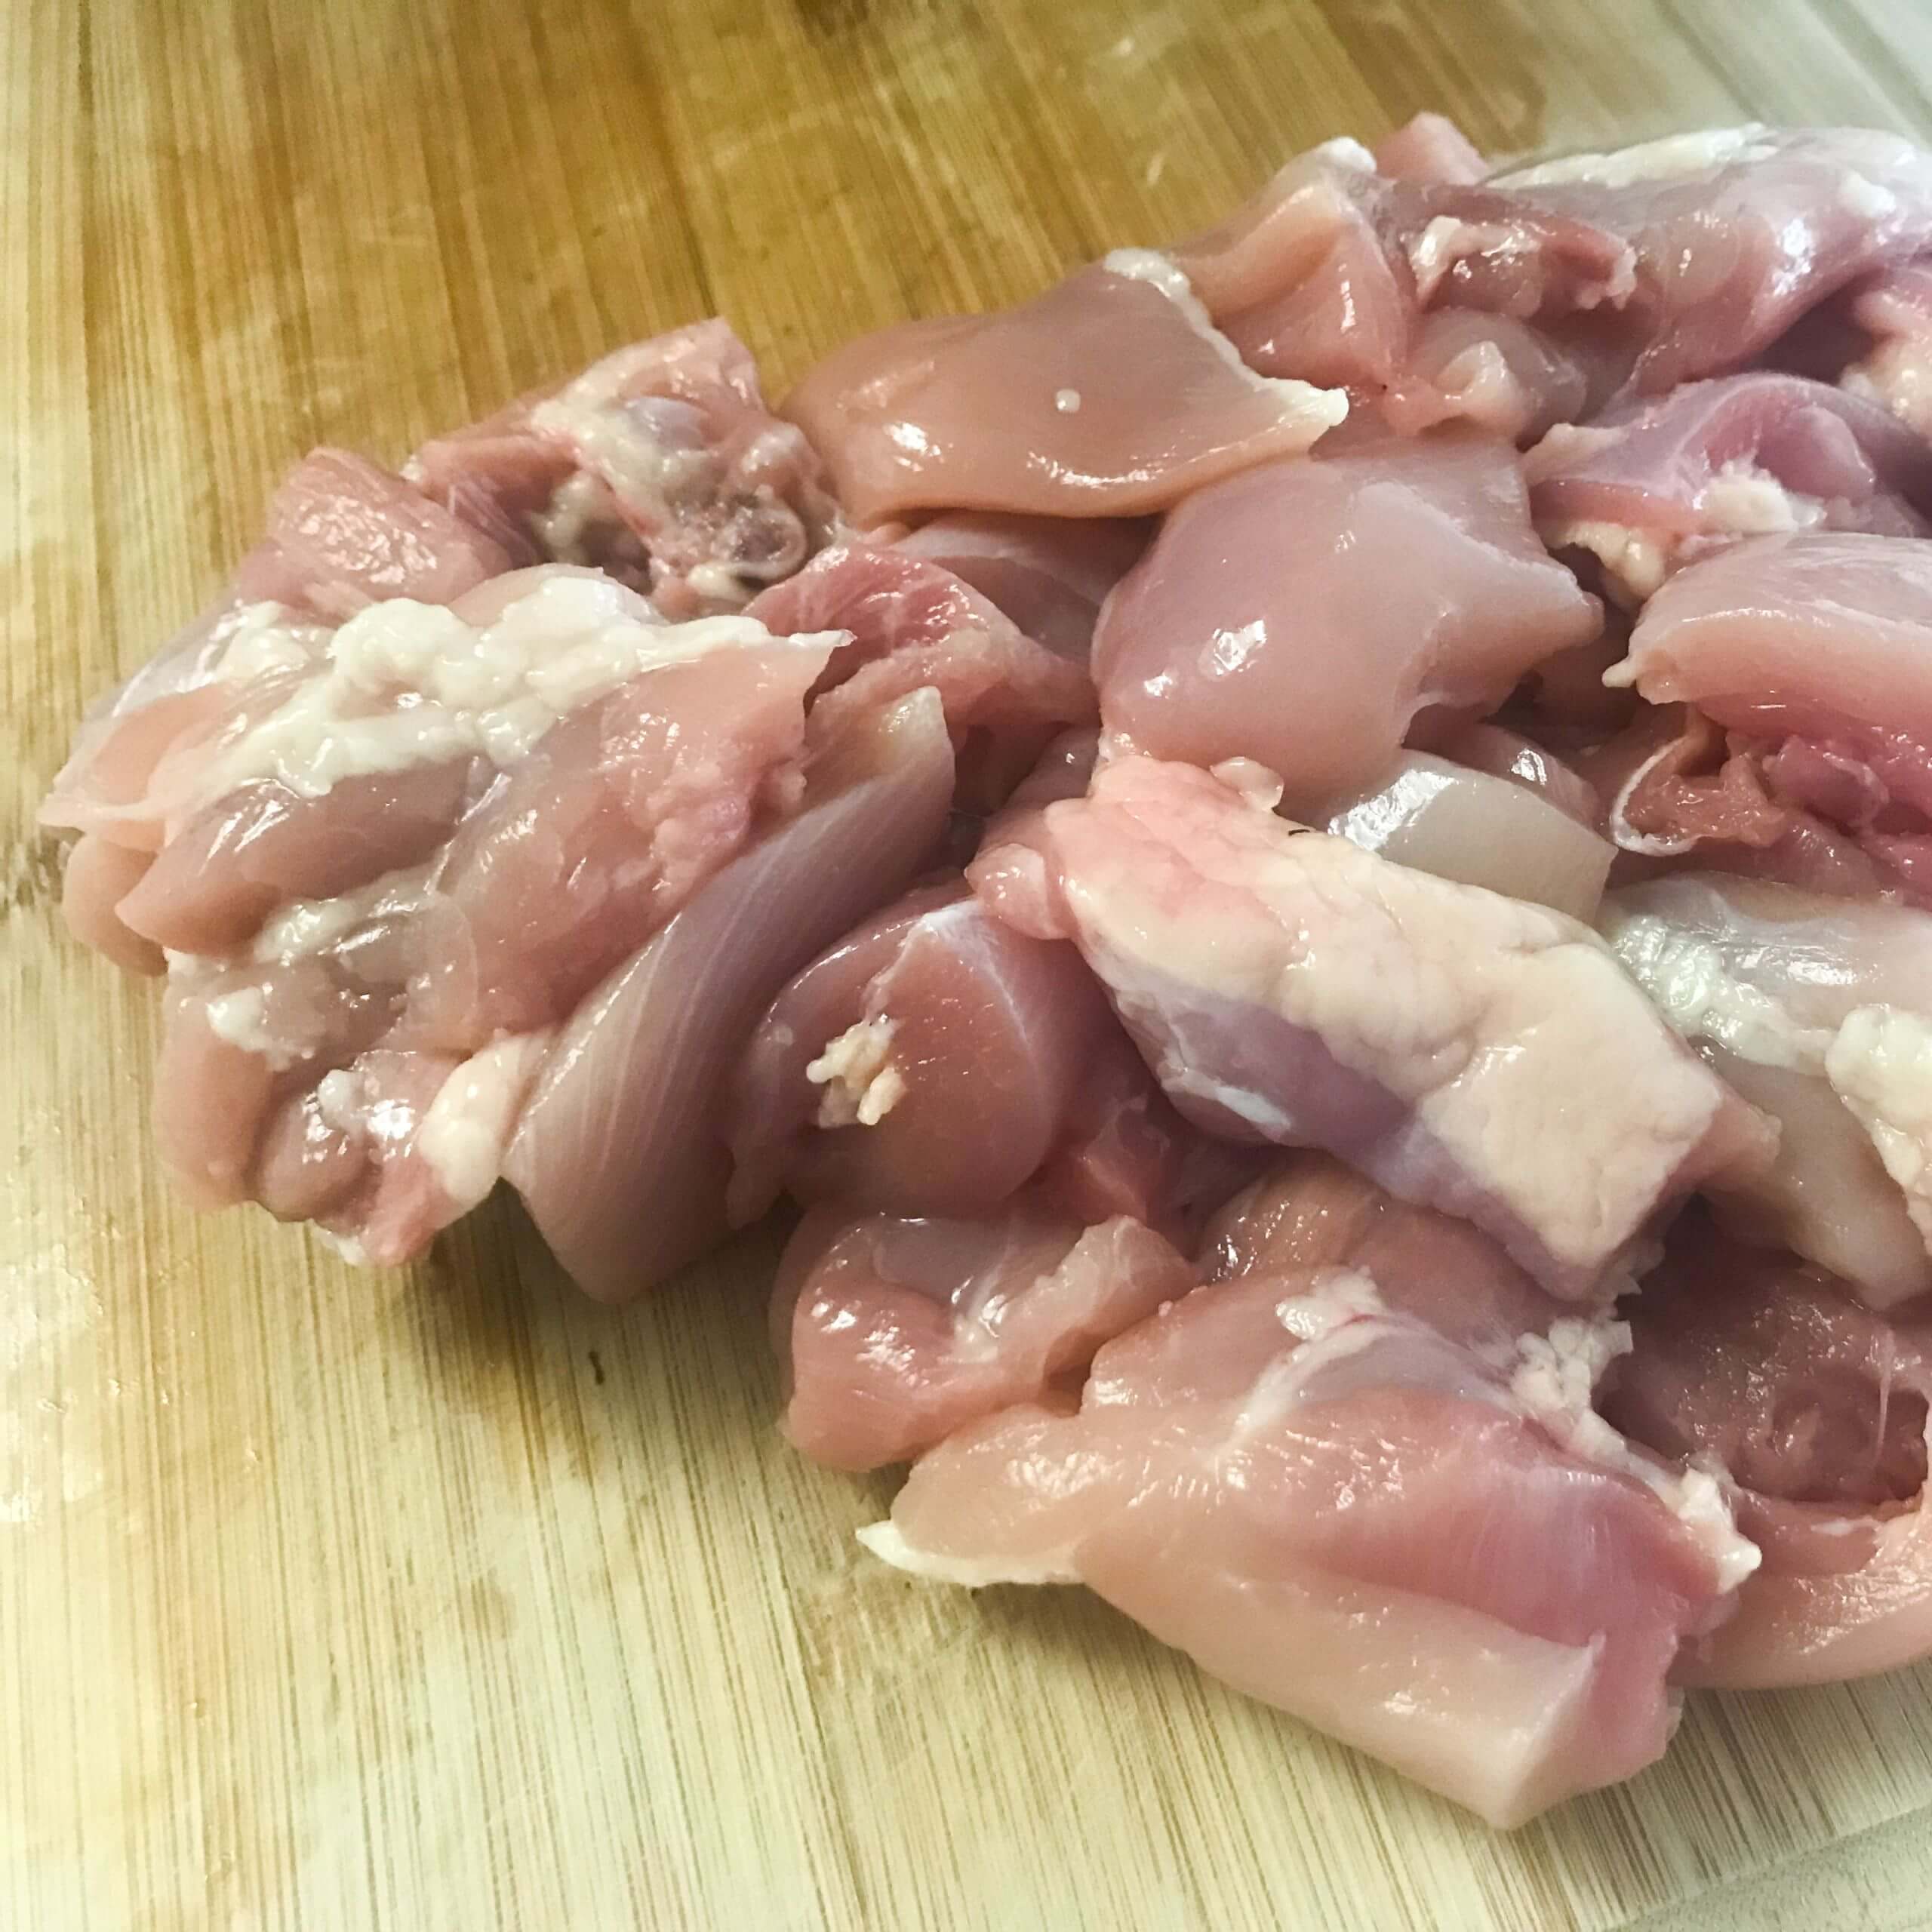 chicken thighs cut into cubes